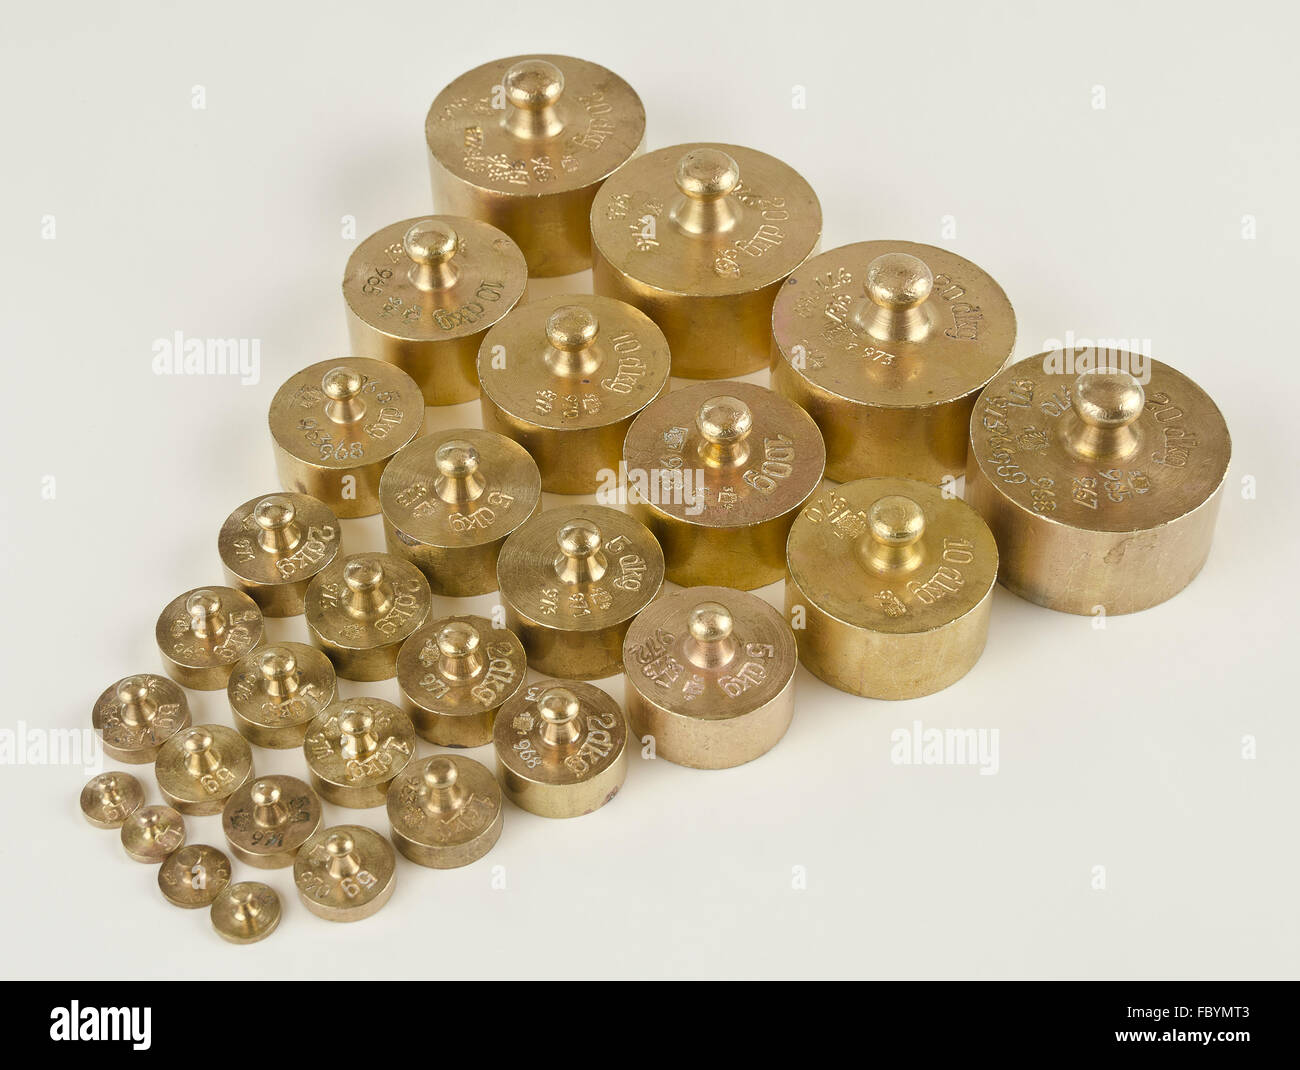 weights made from brass with hallmarks Stock Photo